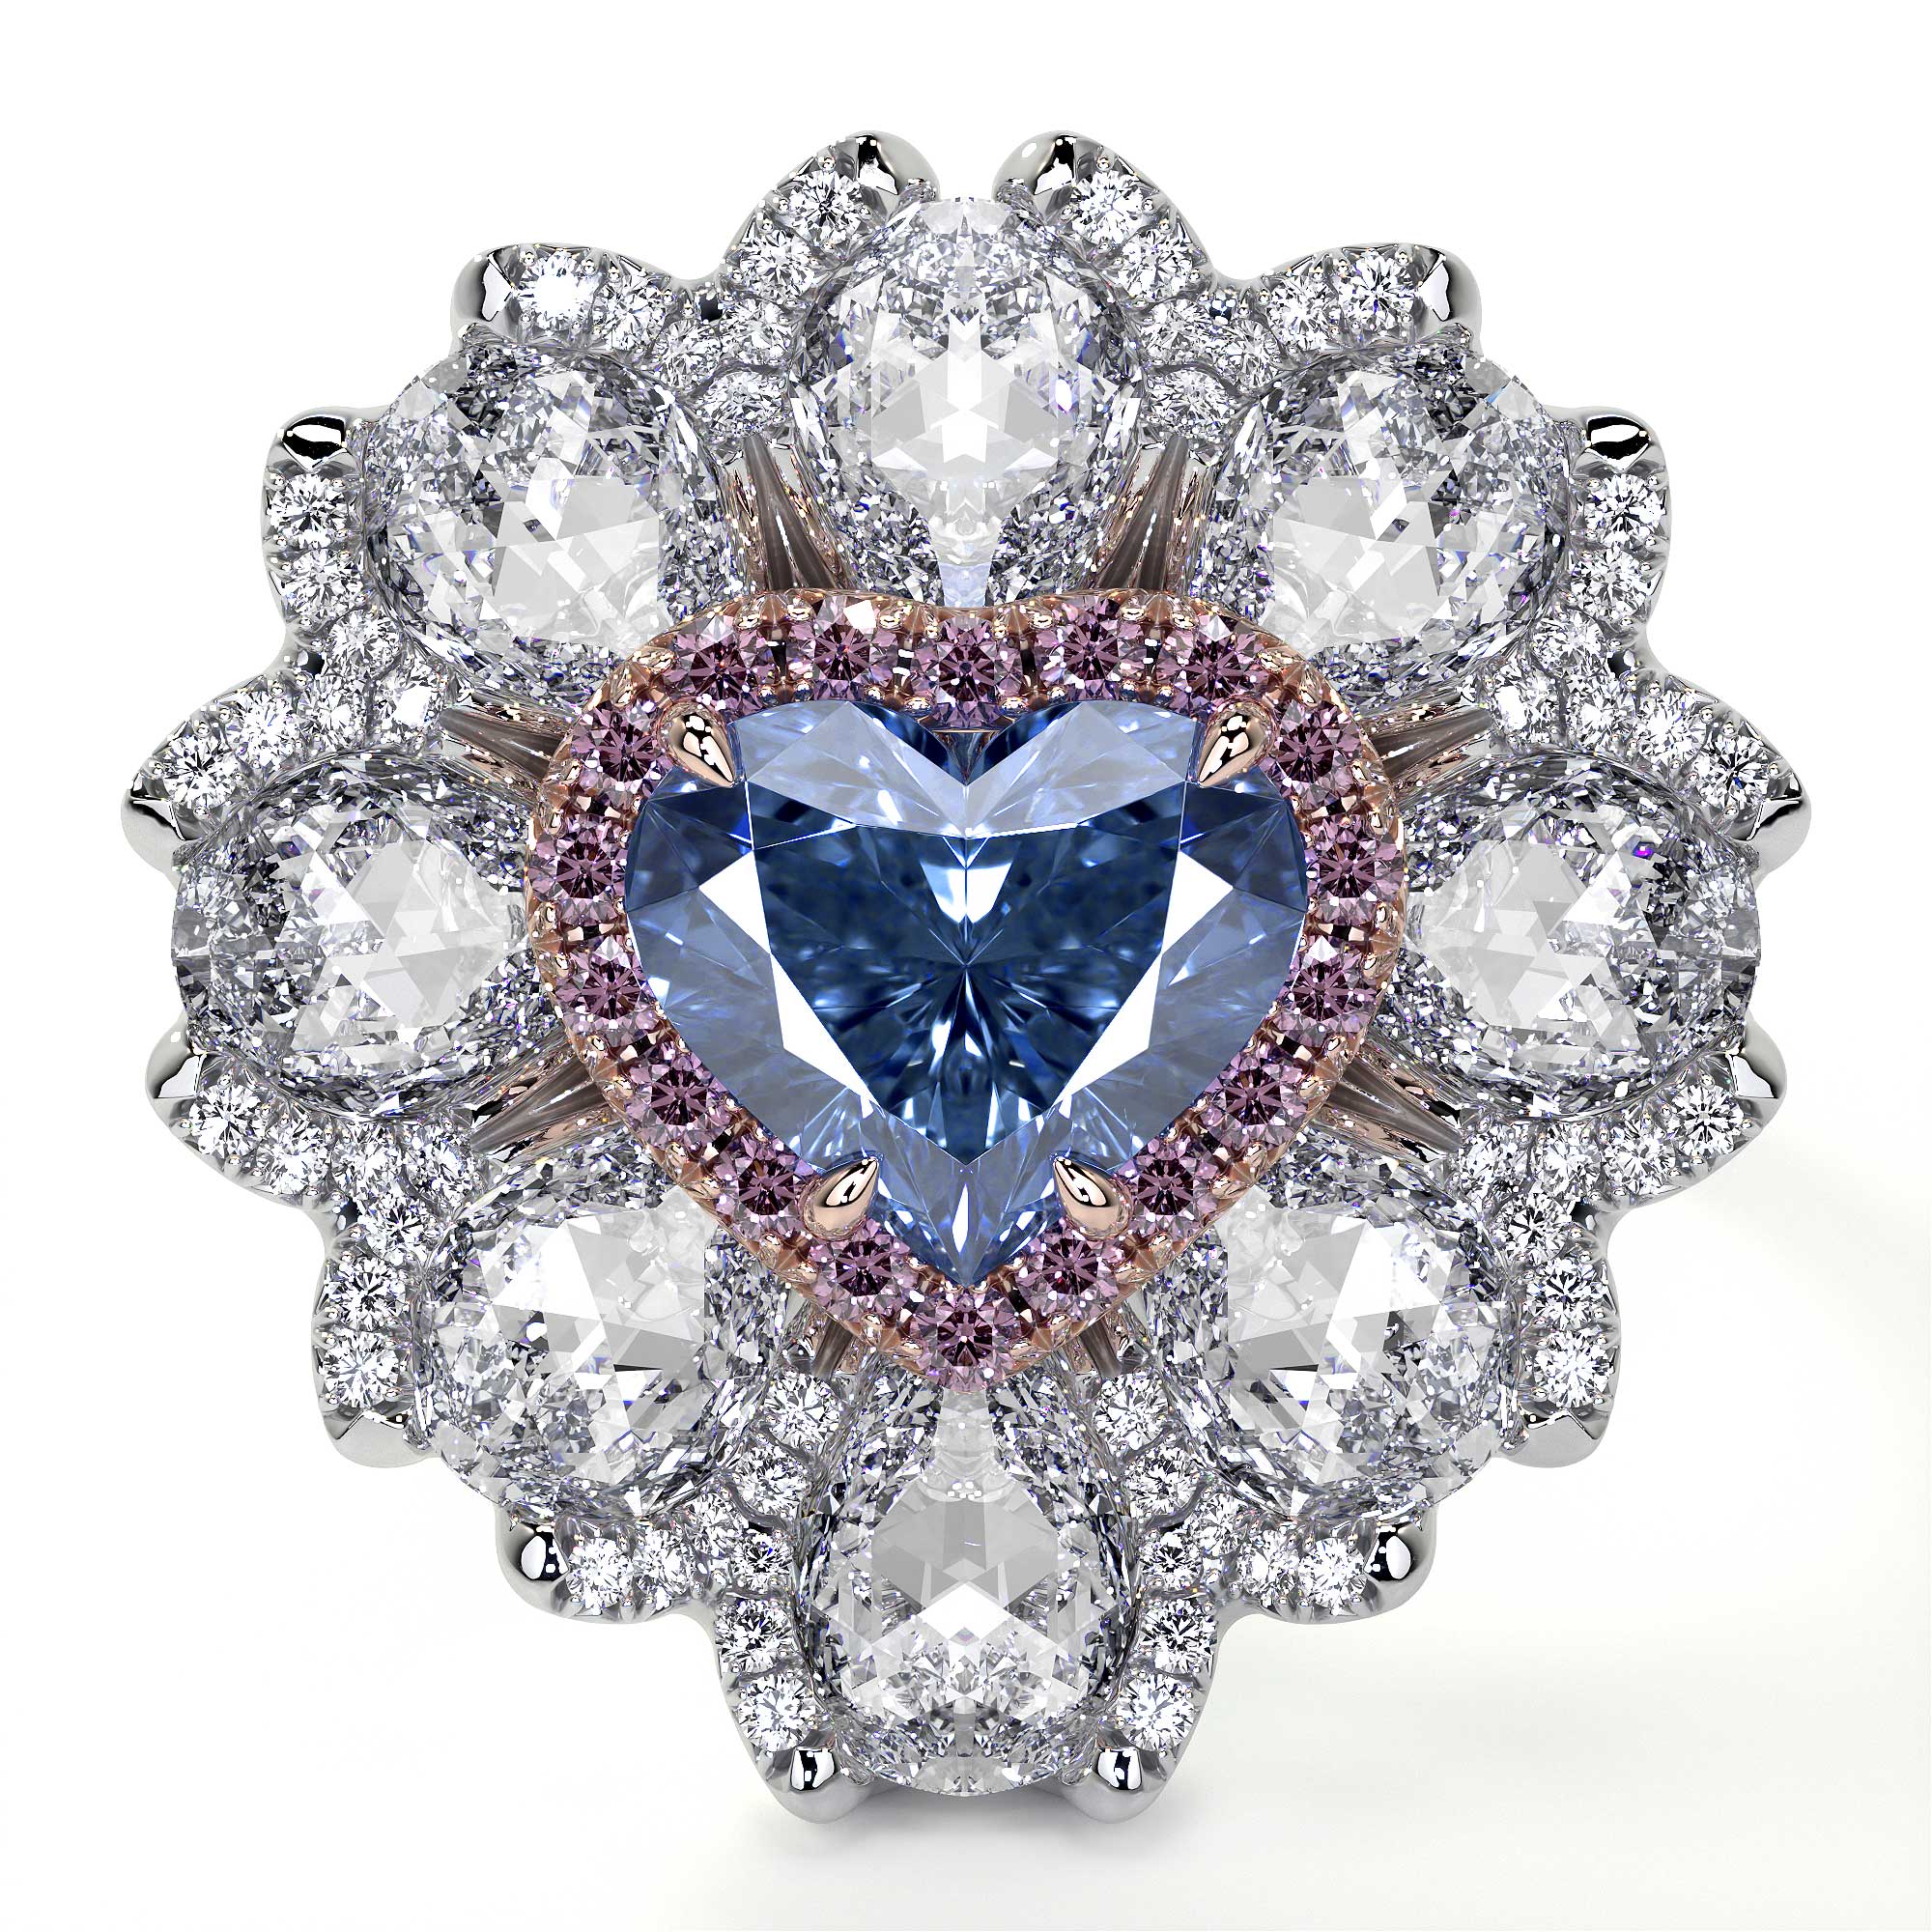 The Hearts-For-Hearts Collection - Leviev Diamonds